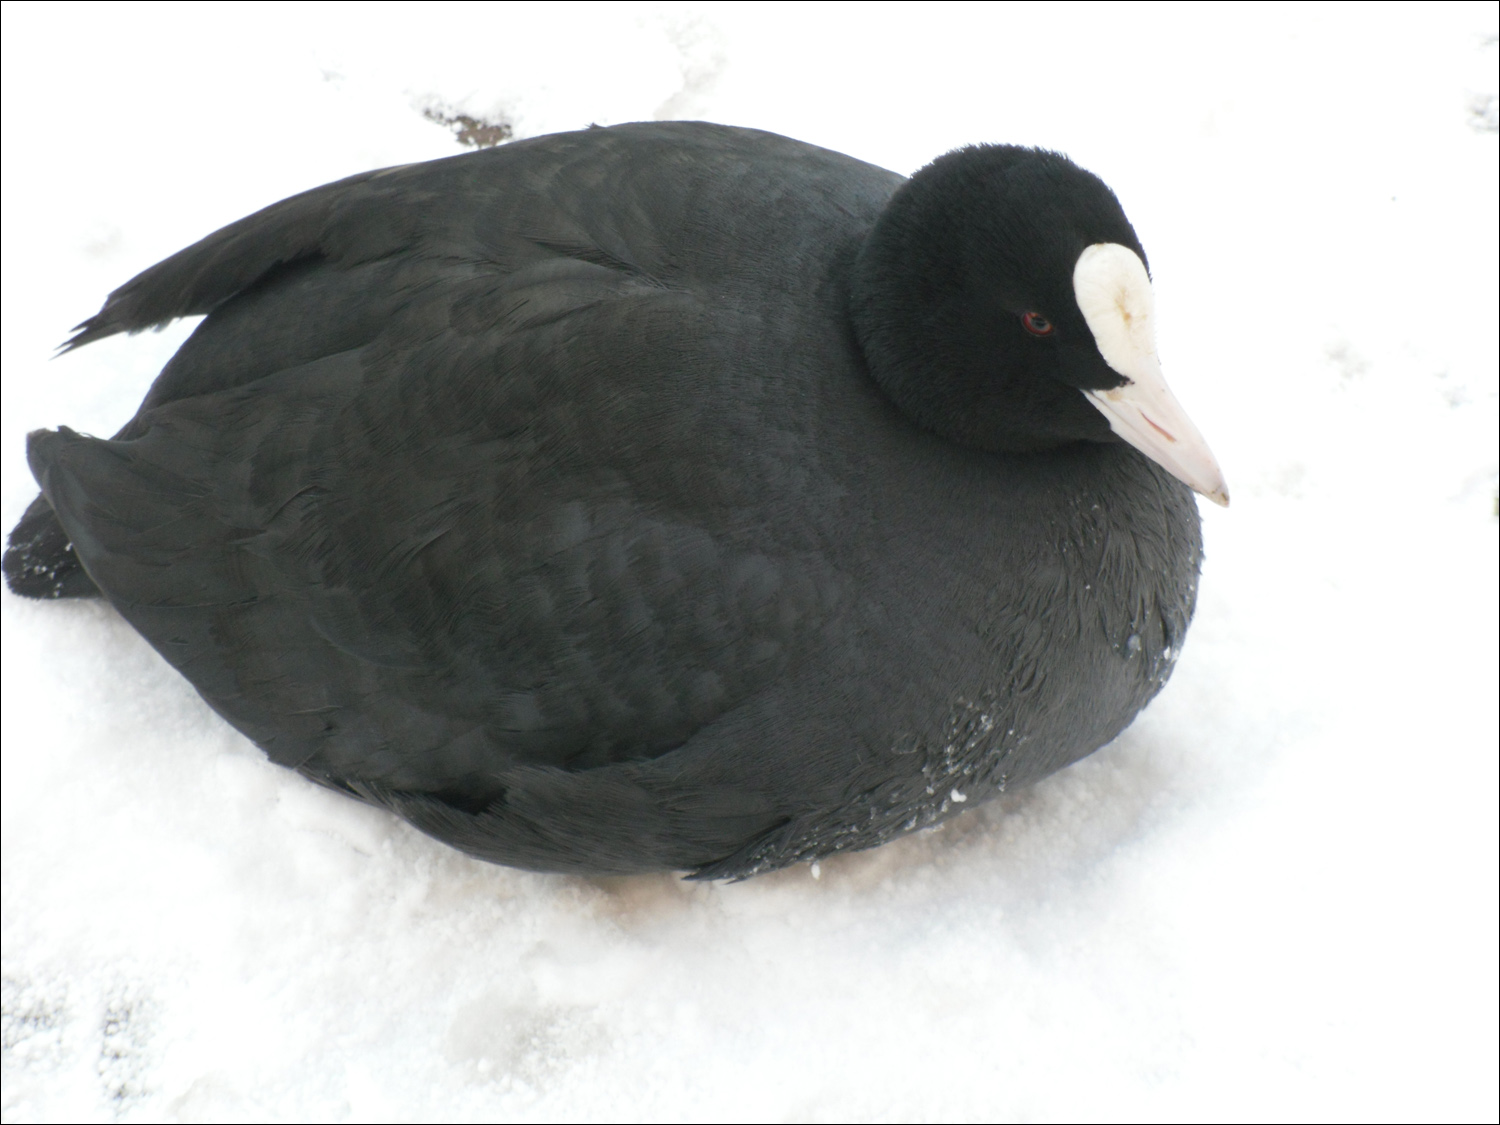 Coot in snow